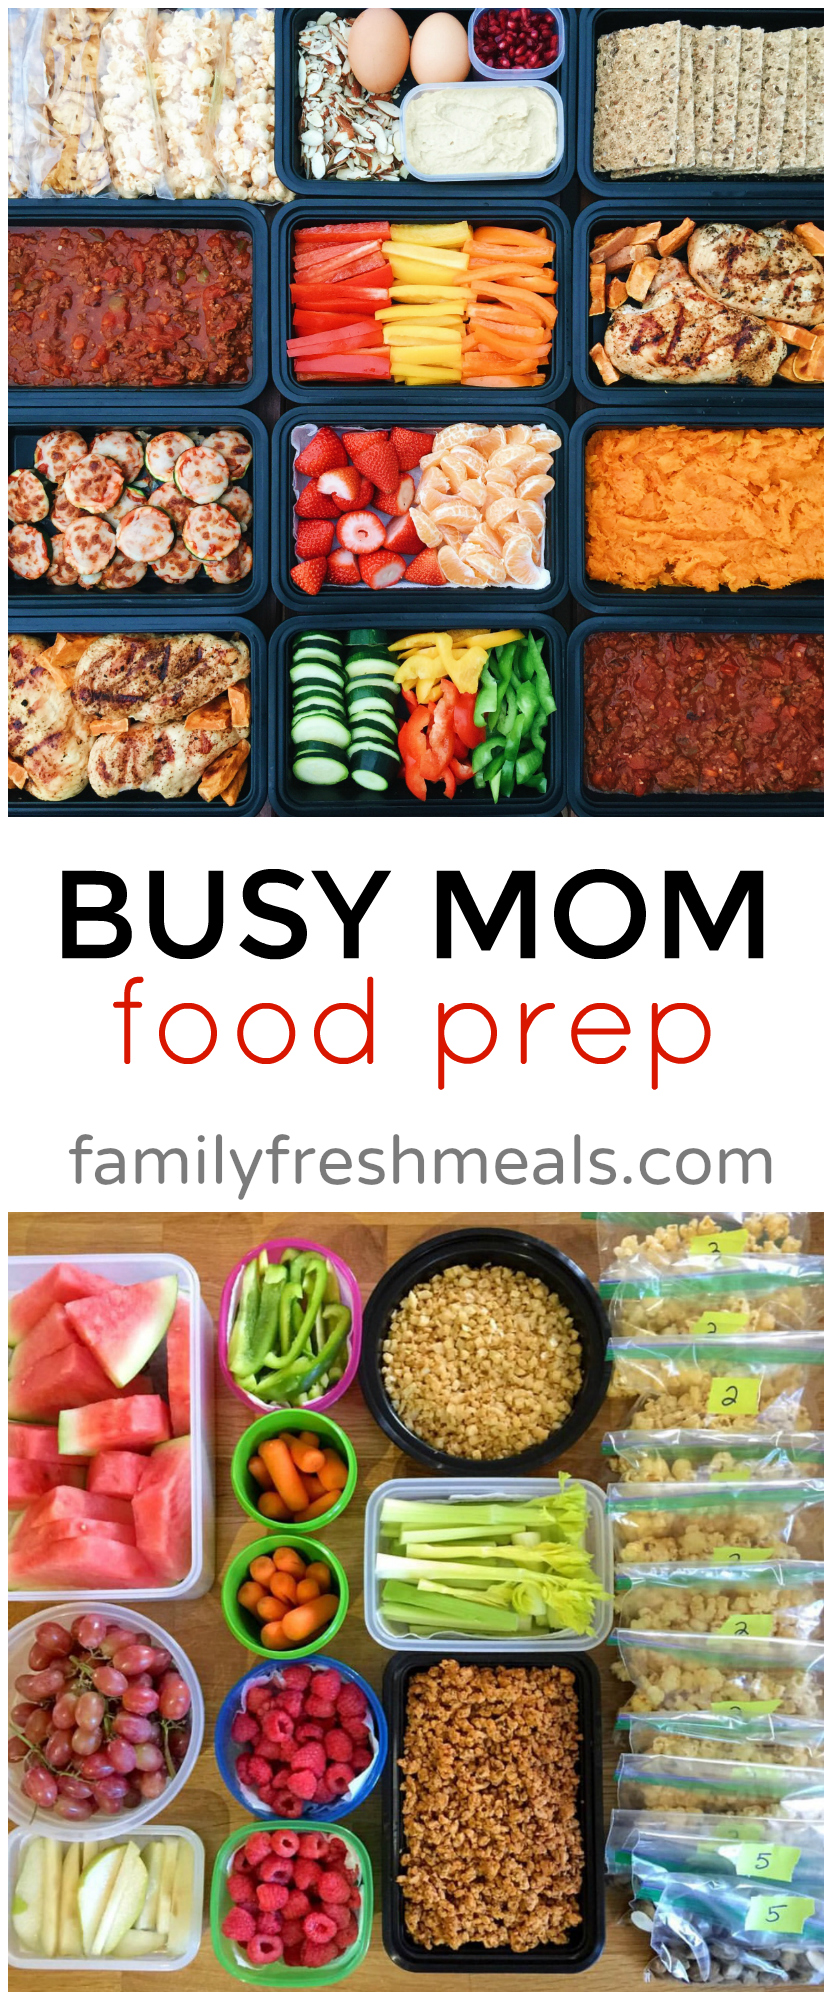 21 Meal Prep Recipes Perfect for Busy Families + Must Have Meal